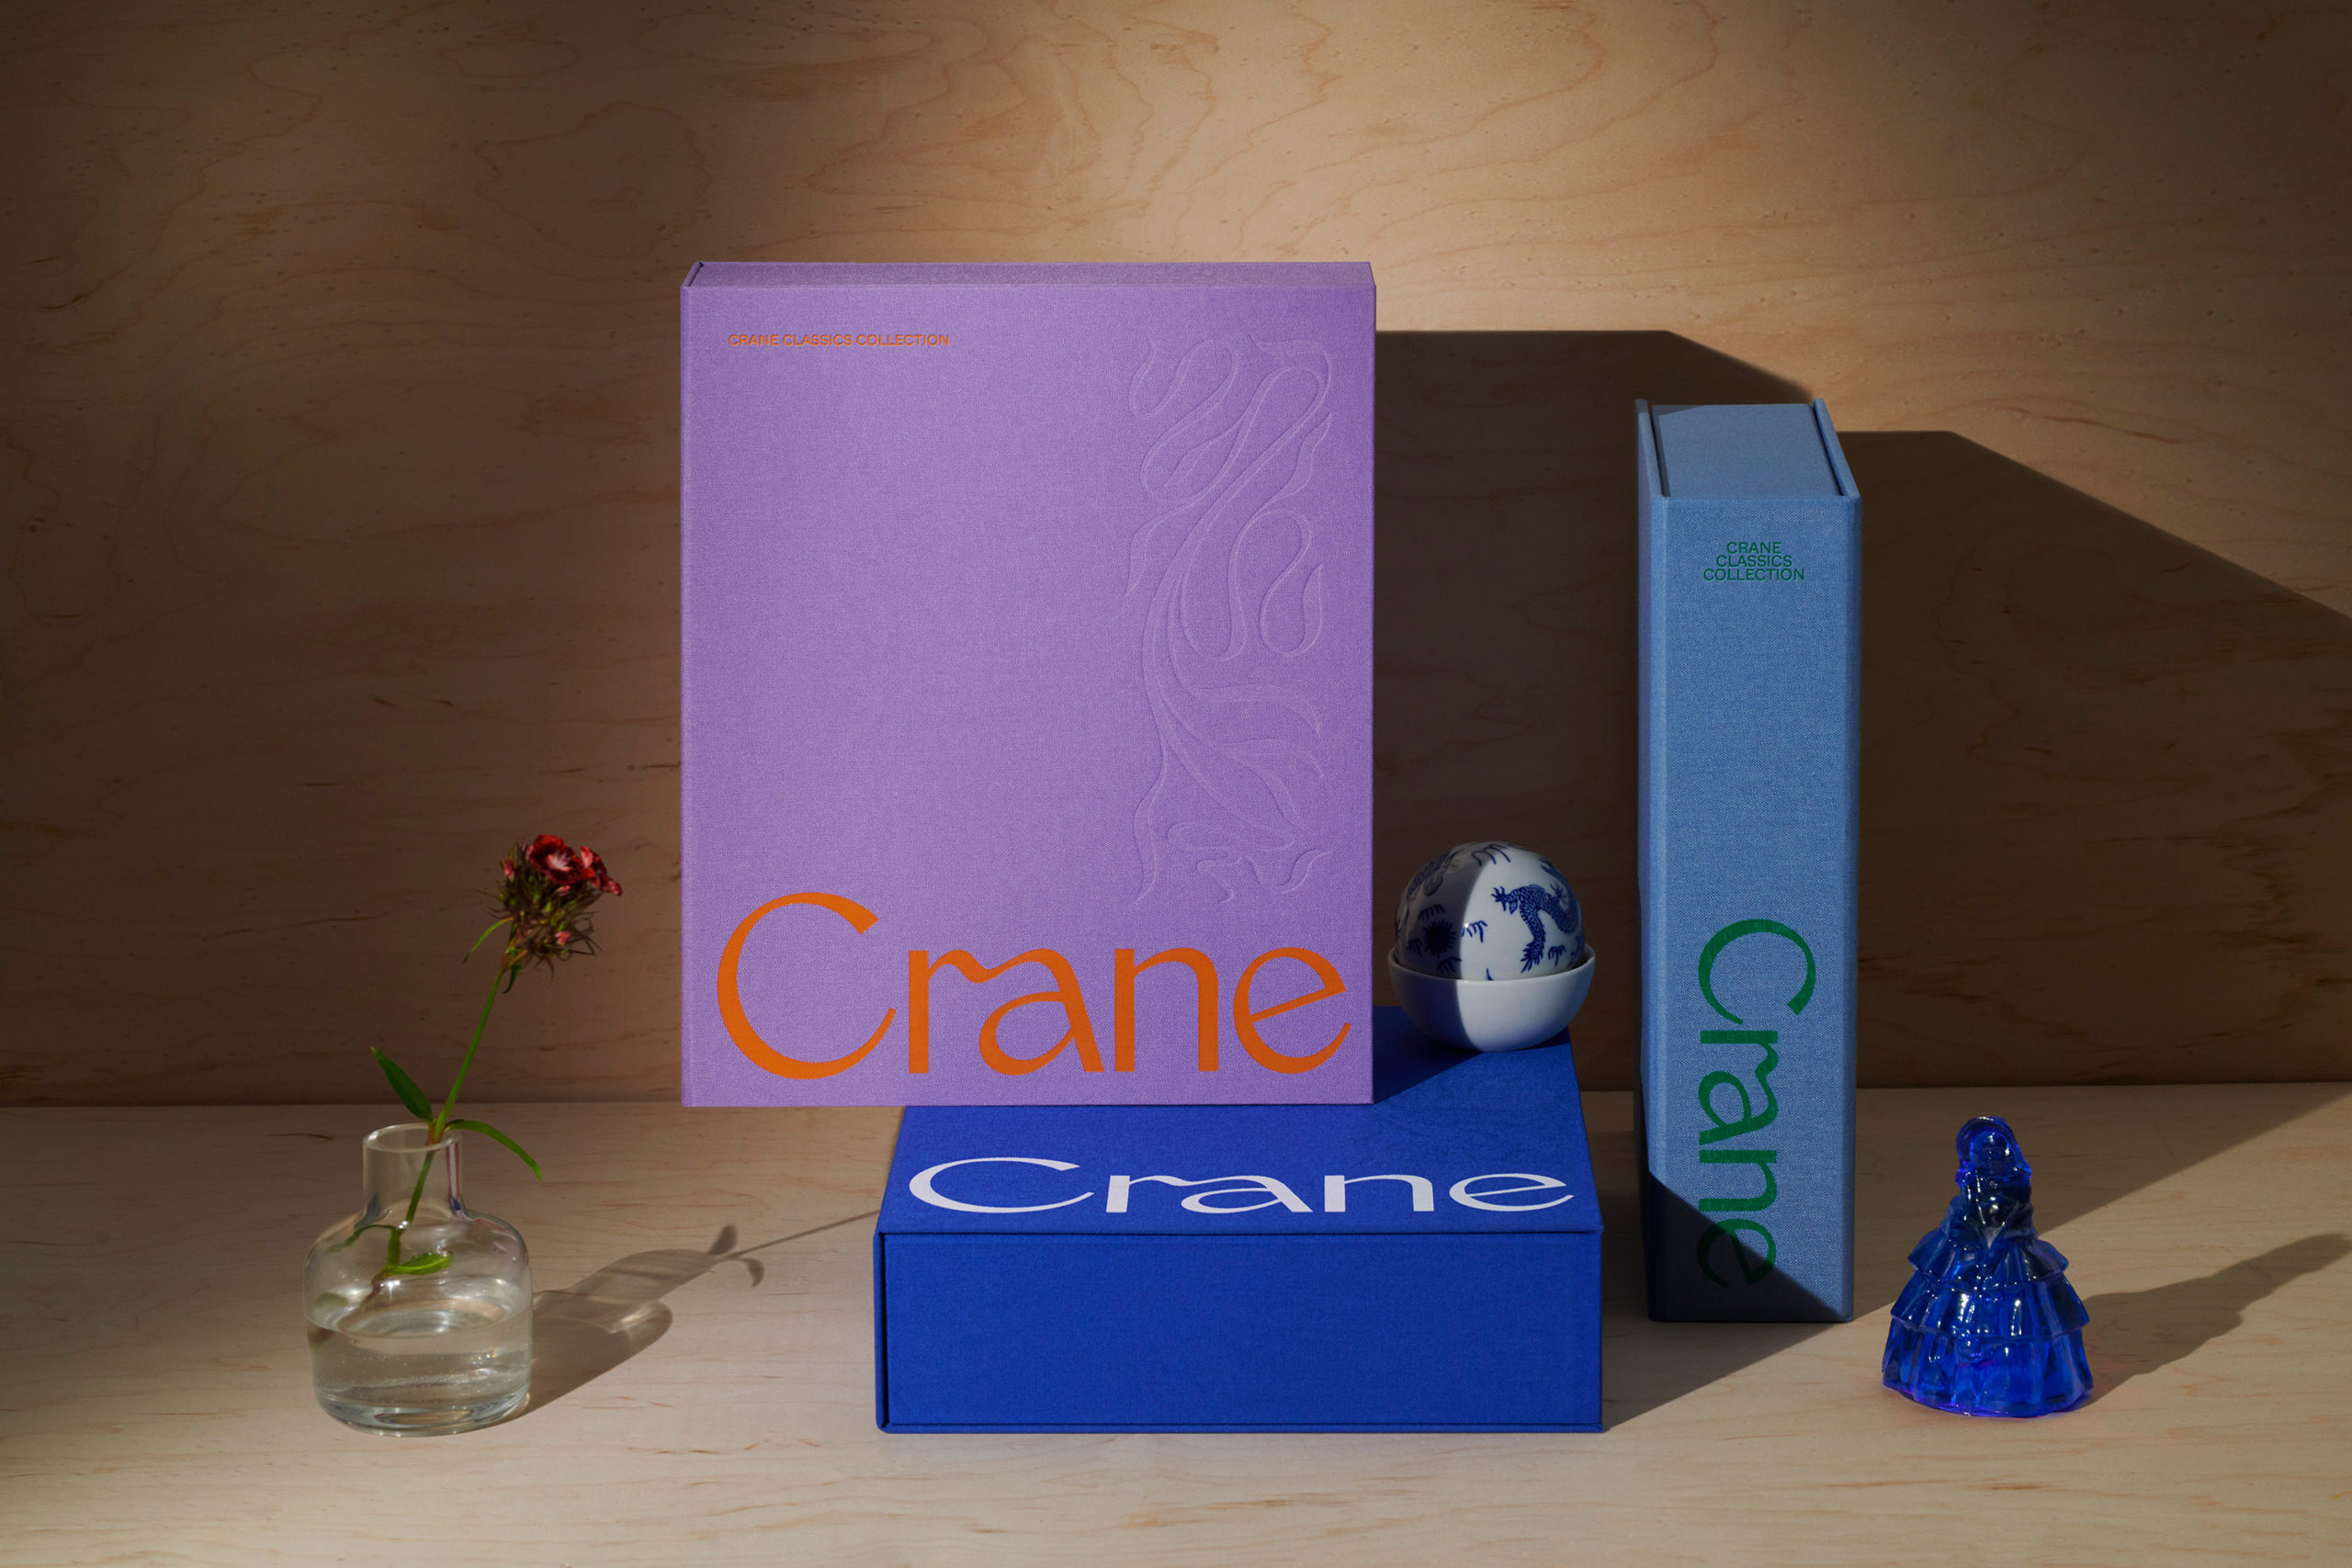 Logo, branding and packaging for American stationery and paper-maker Crane designed by Collins